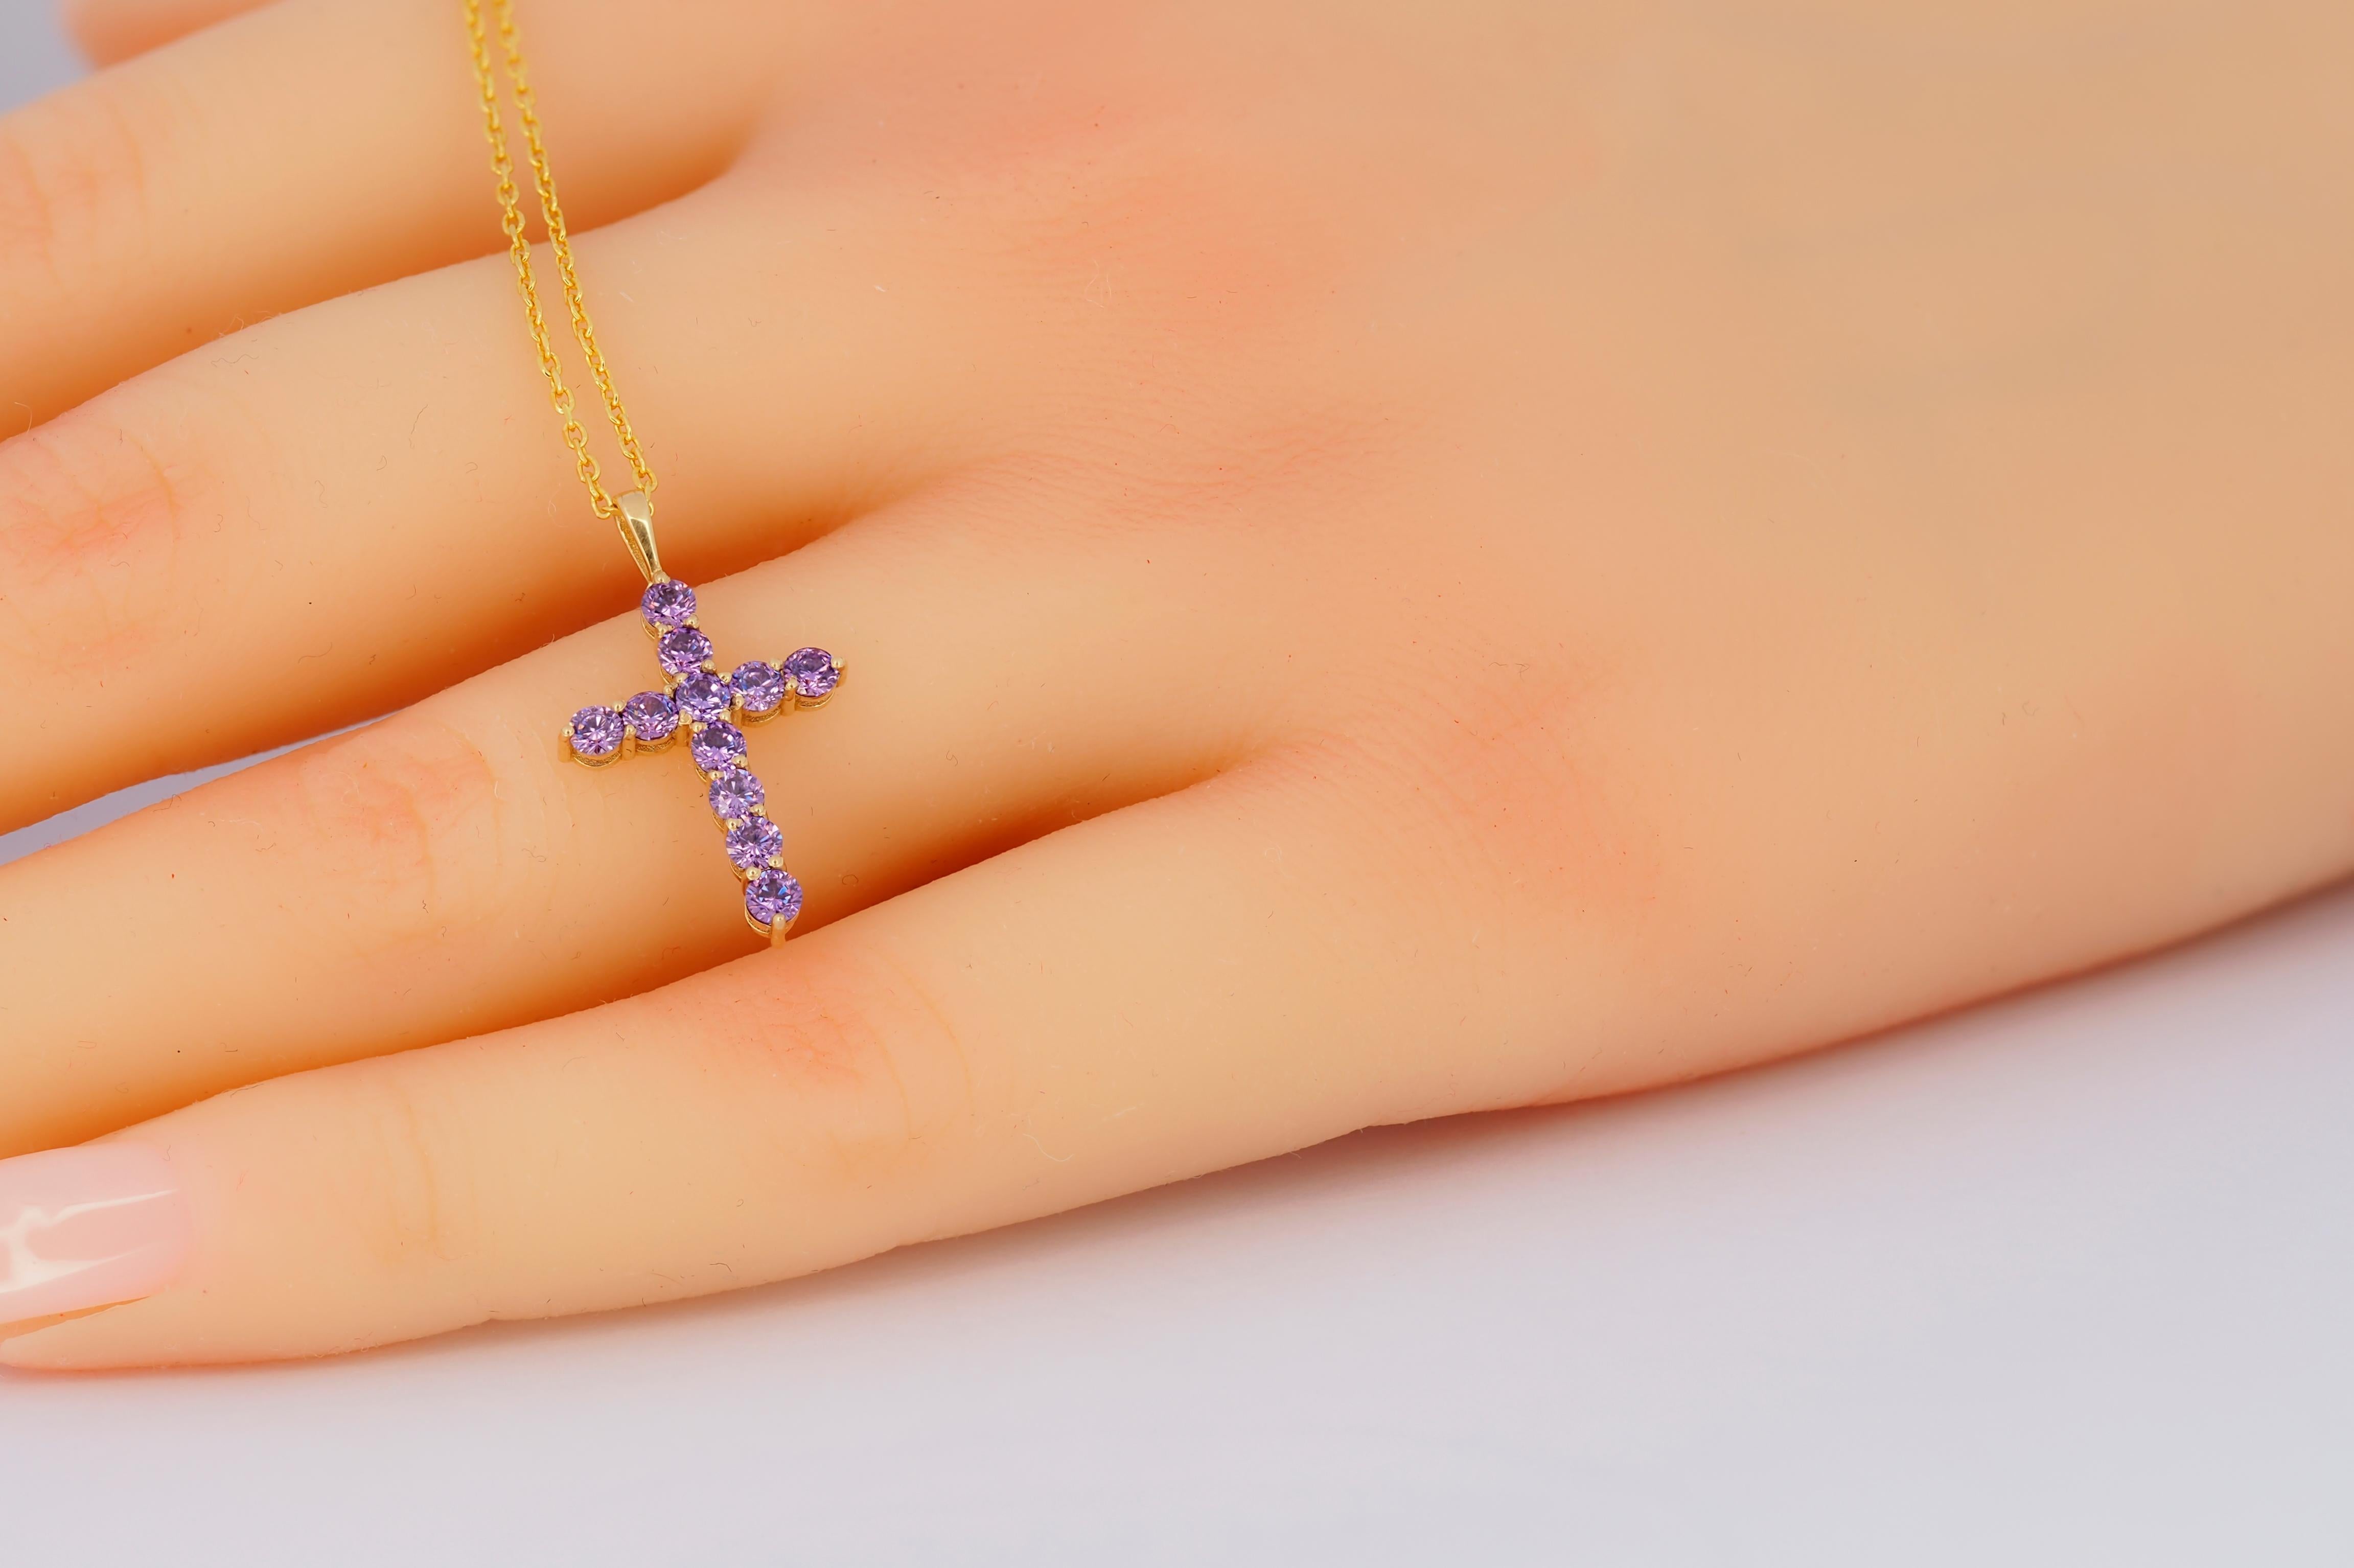 Lavender gemstone 14k gold cross pendant. Amethyst Cross Pendant. Gold cross pendant. 14k solid Gold cross pendant amethyst. Religious Cross Necklace pendant. Simple everyday cross.

Selling pendant only no chain. If you need chain let us know.